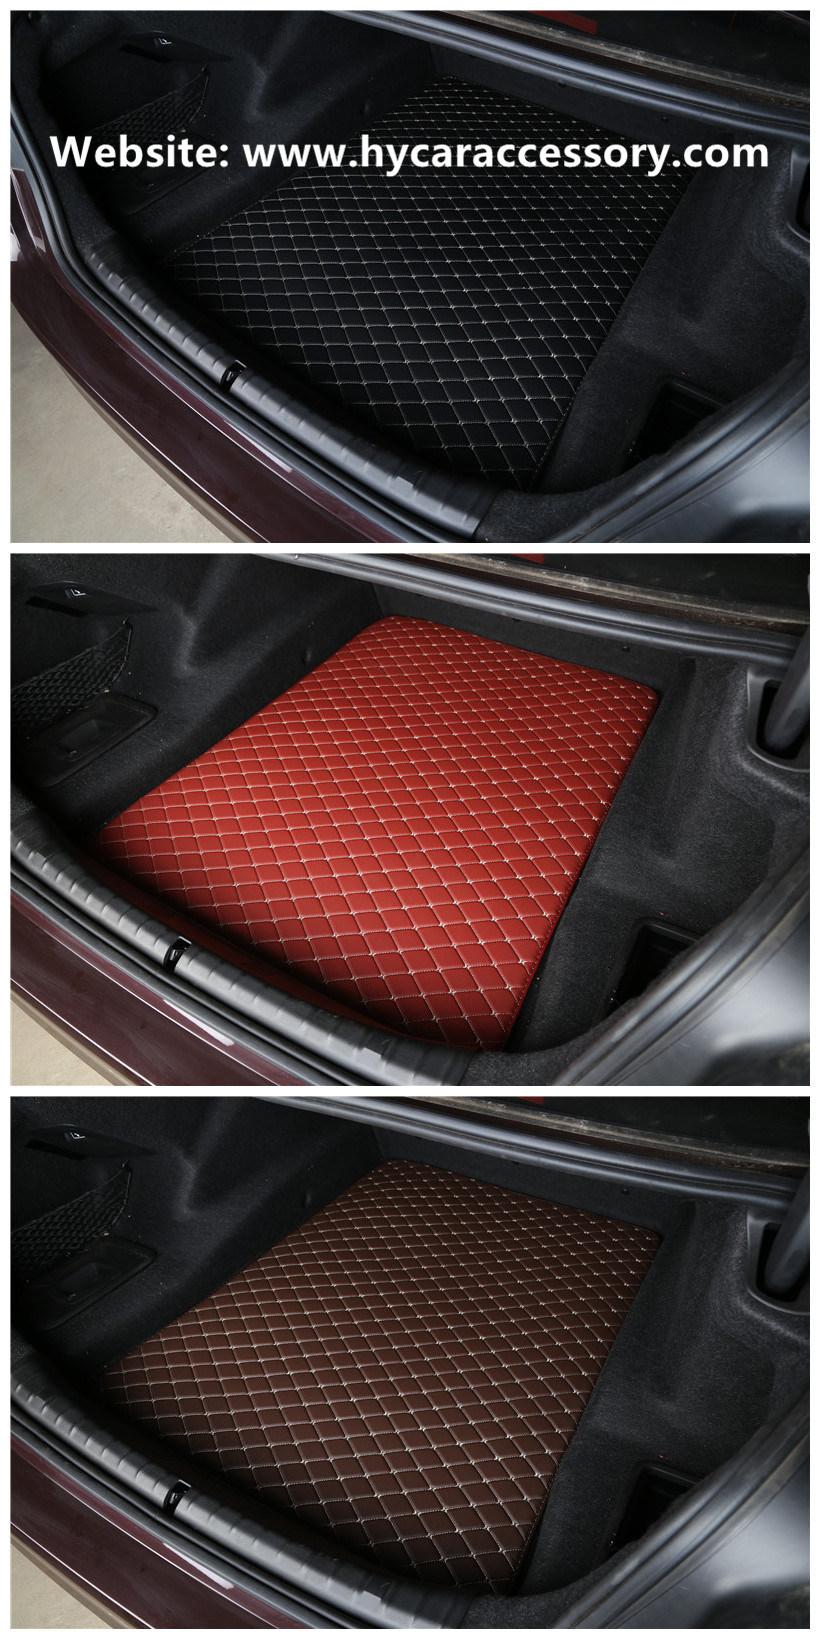 Wholesale Customized Eco-Friendly Wear Special Leather Non-Slip Car Boot Mat